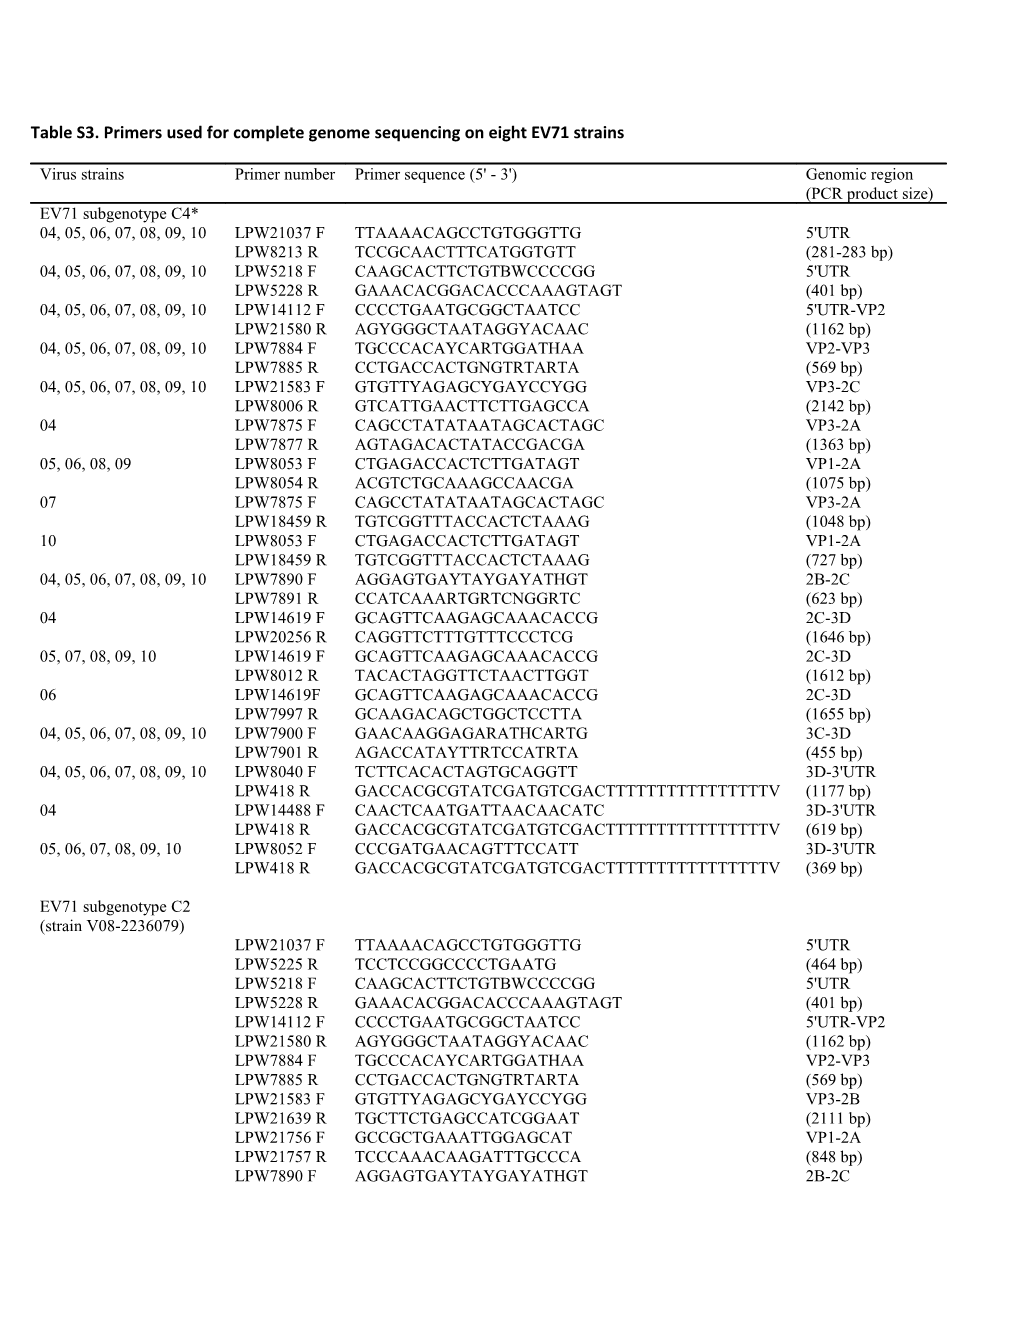 Table S3.Primers Used for Complete Genome Sequencing on Eight EV71 Strains